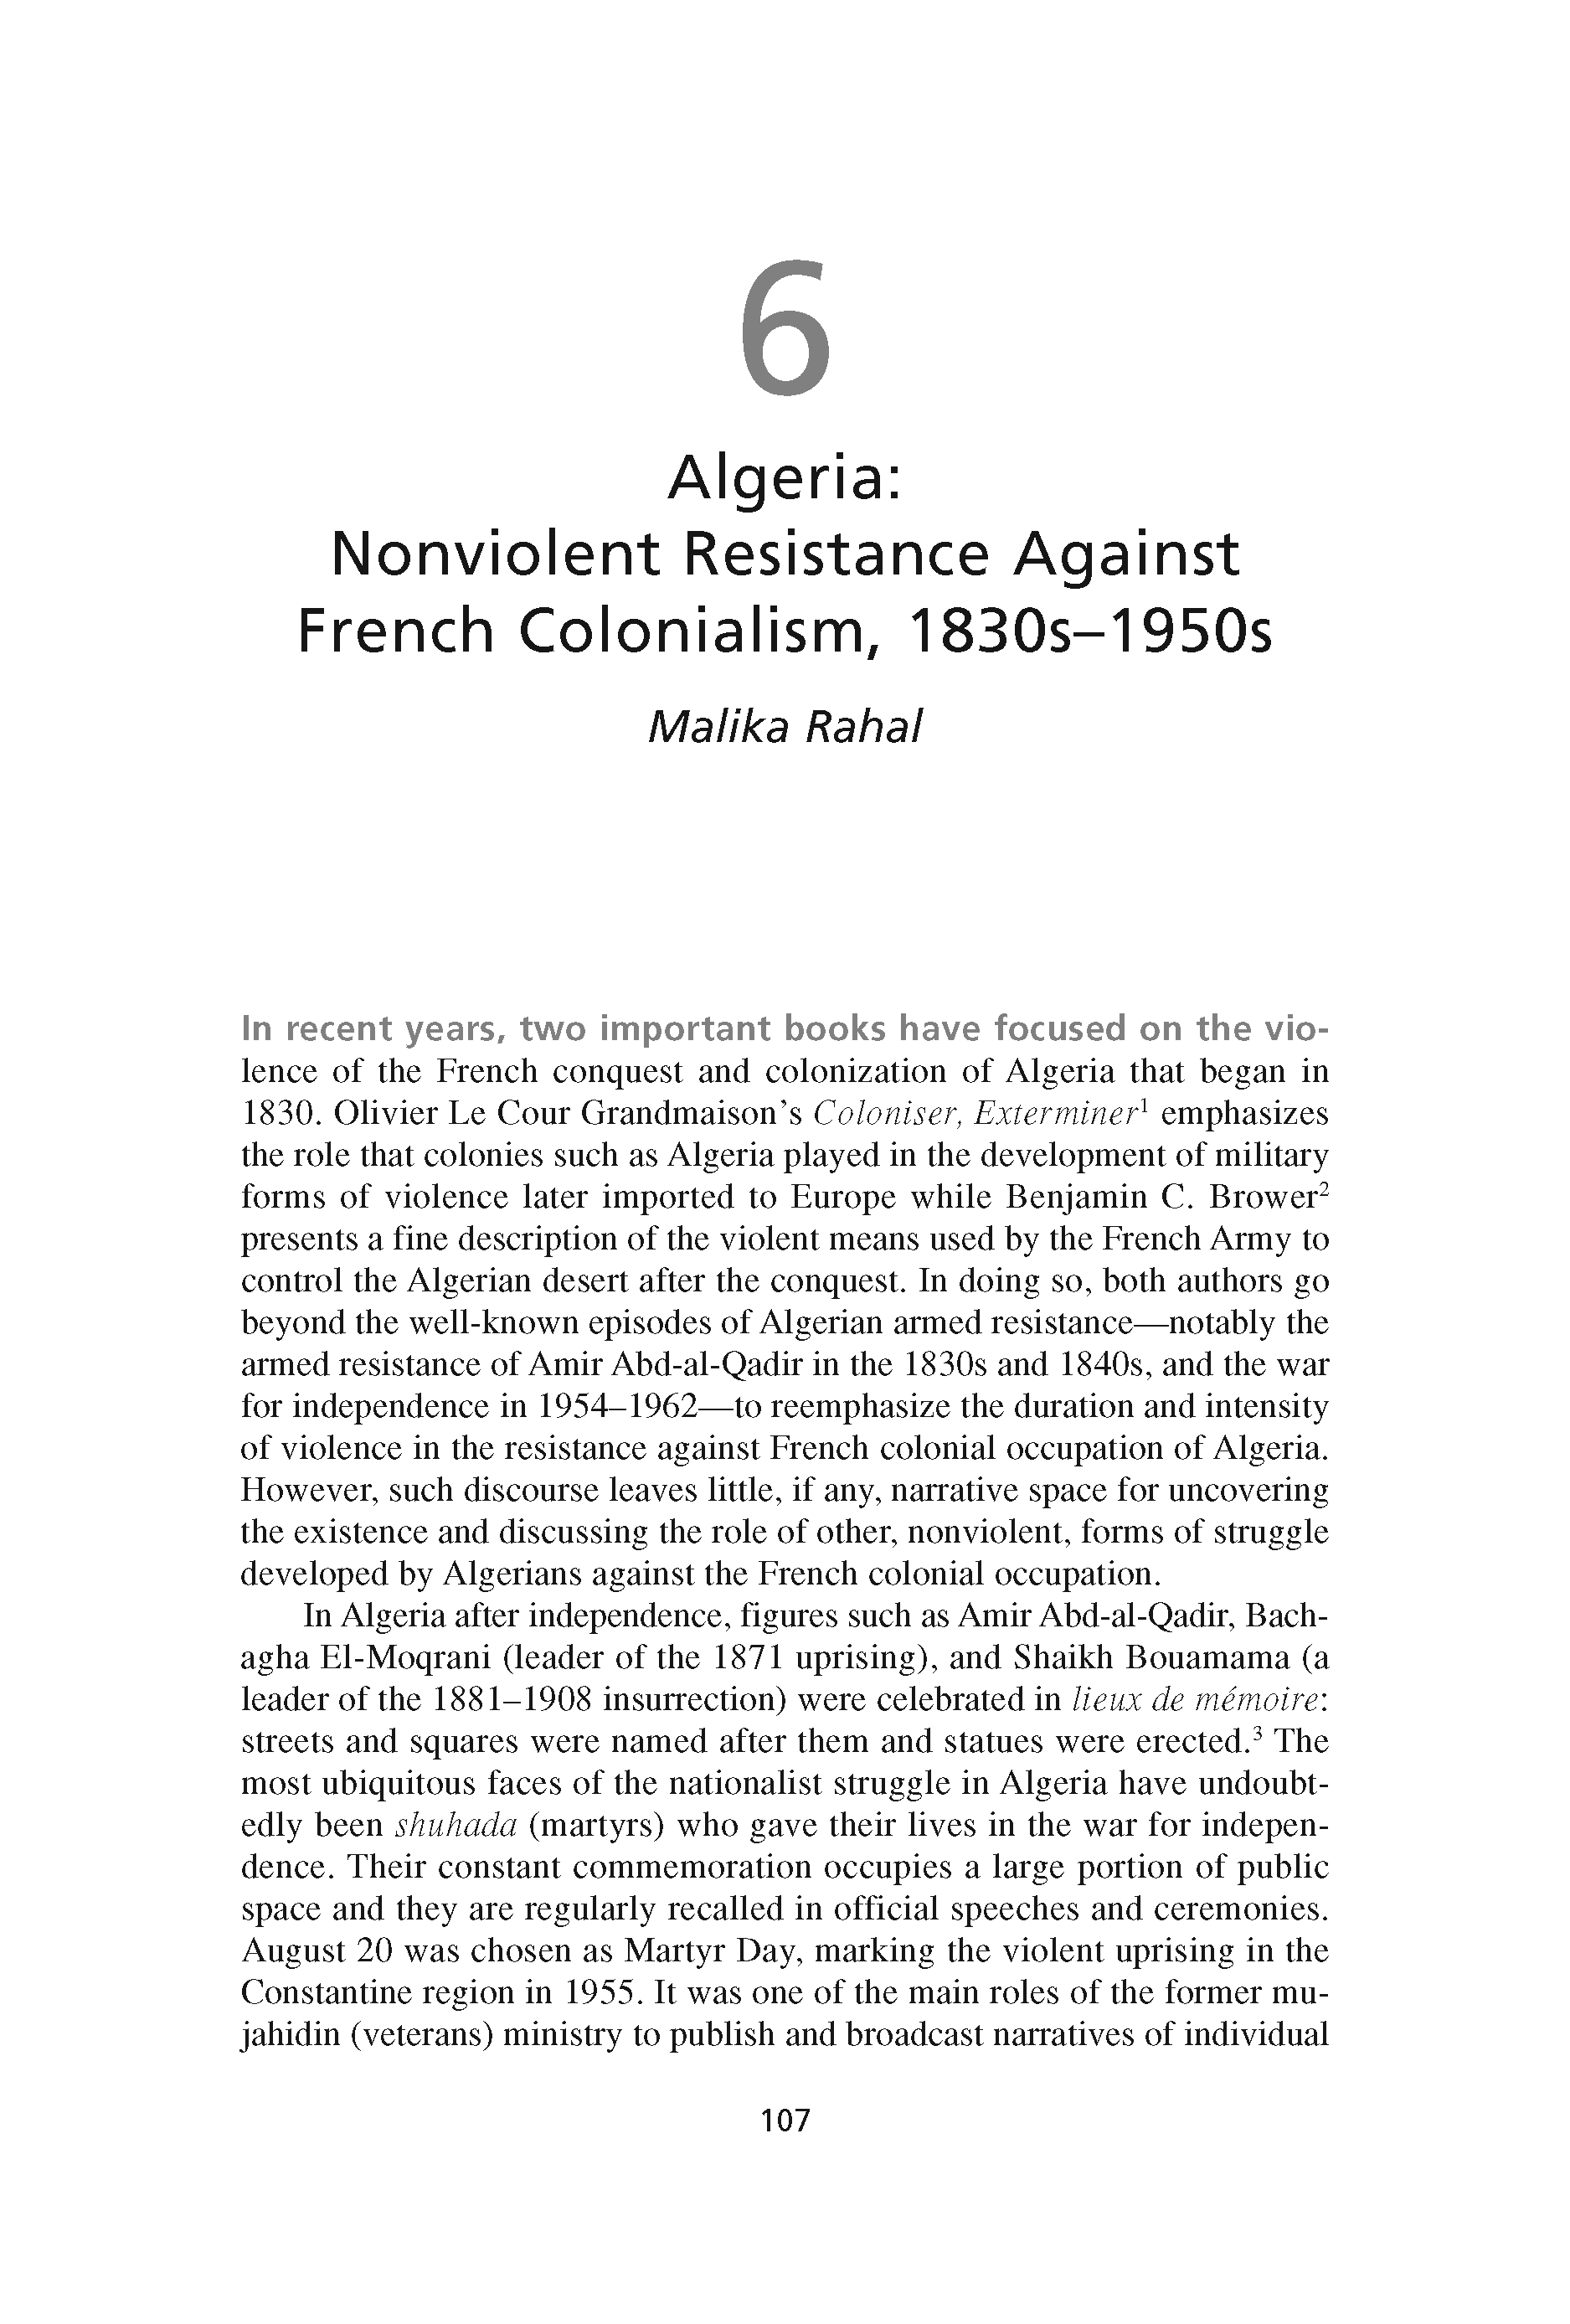 Algeria: Nonviolent Resistance Against French Colonialism, 1830s-1950s (Chapter 6 from ‘Recovering Nonviolent History’)